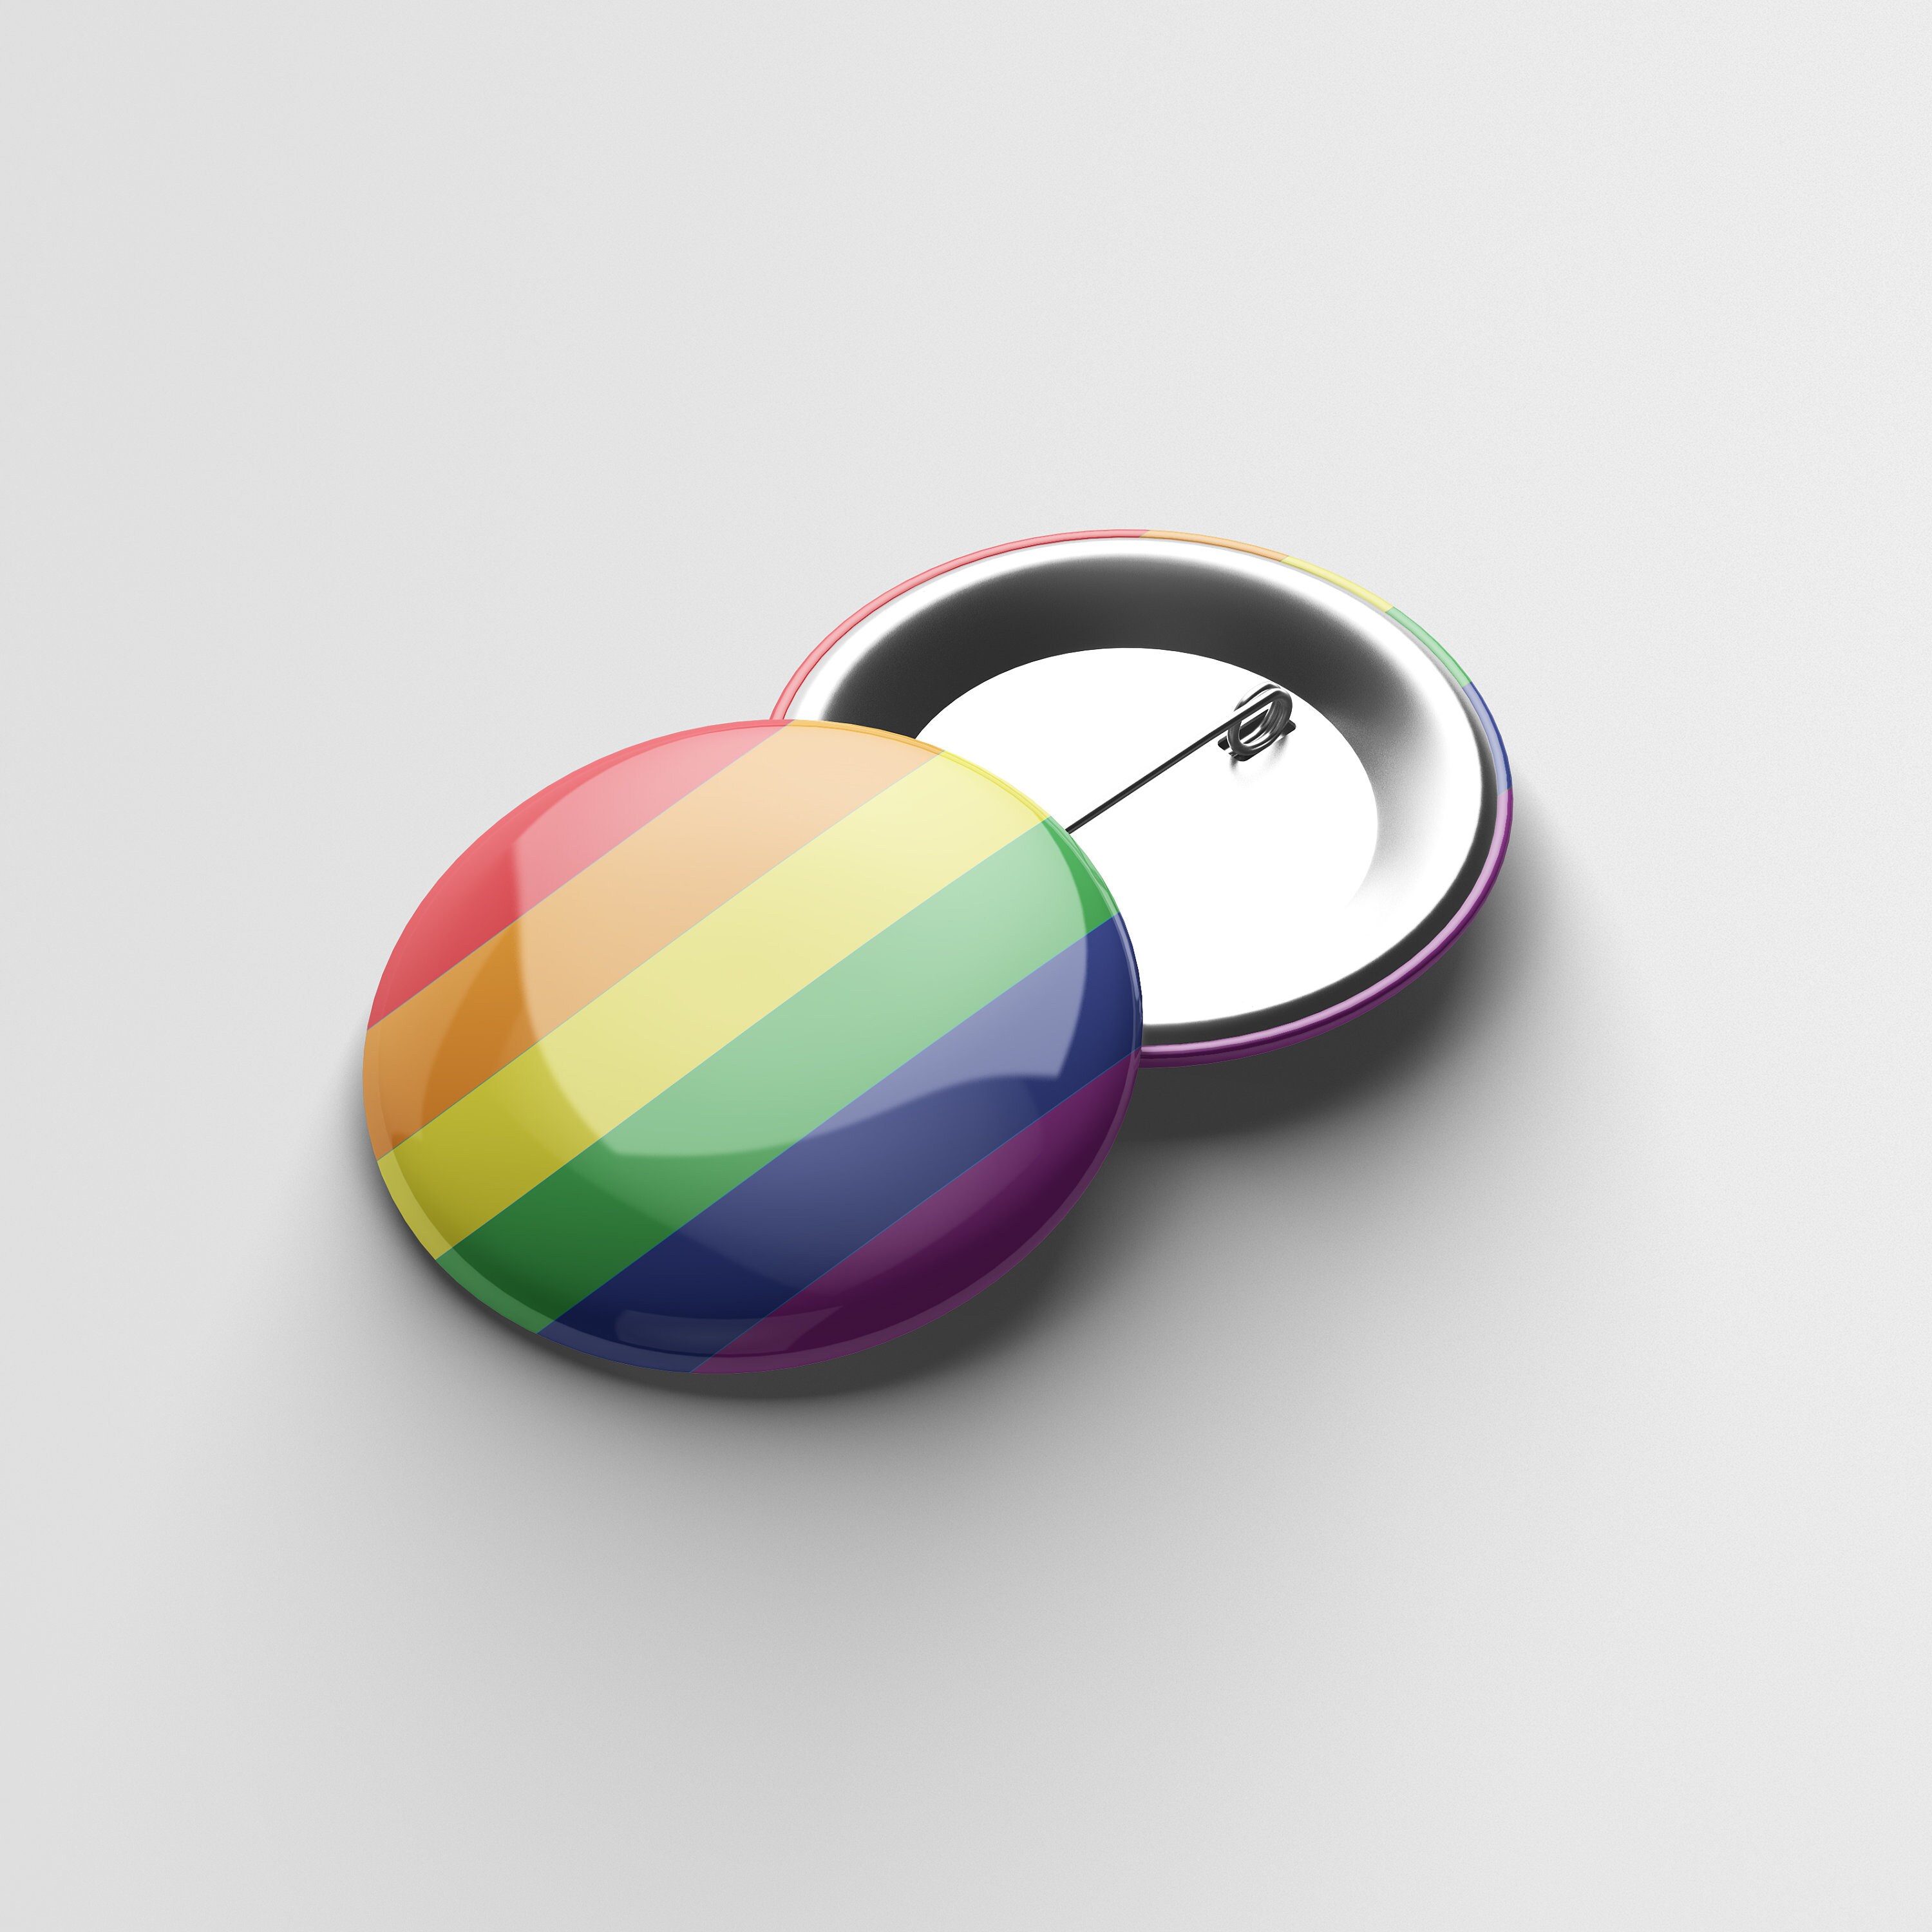 LGBTQ+ PRIDE FLAGS BUTTON BADGE CHOICE OF SIZES GAY LESBIAN METAL PIN BACK 